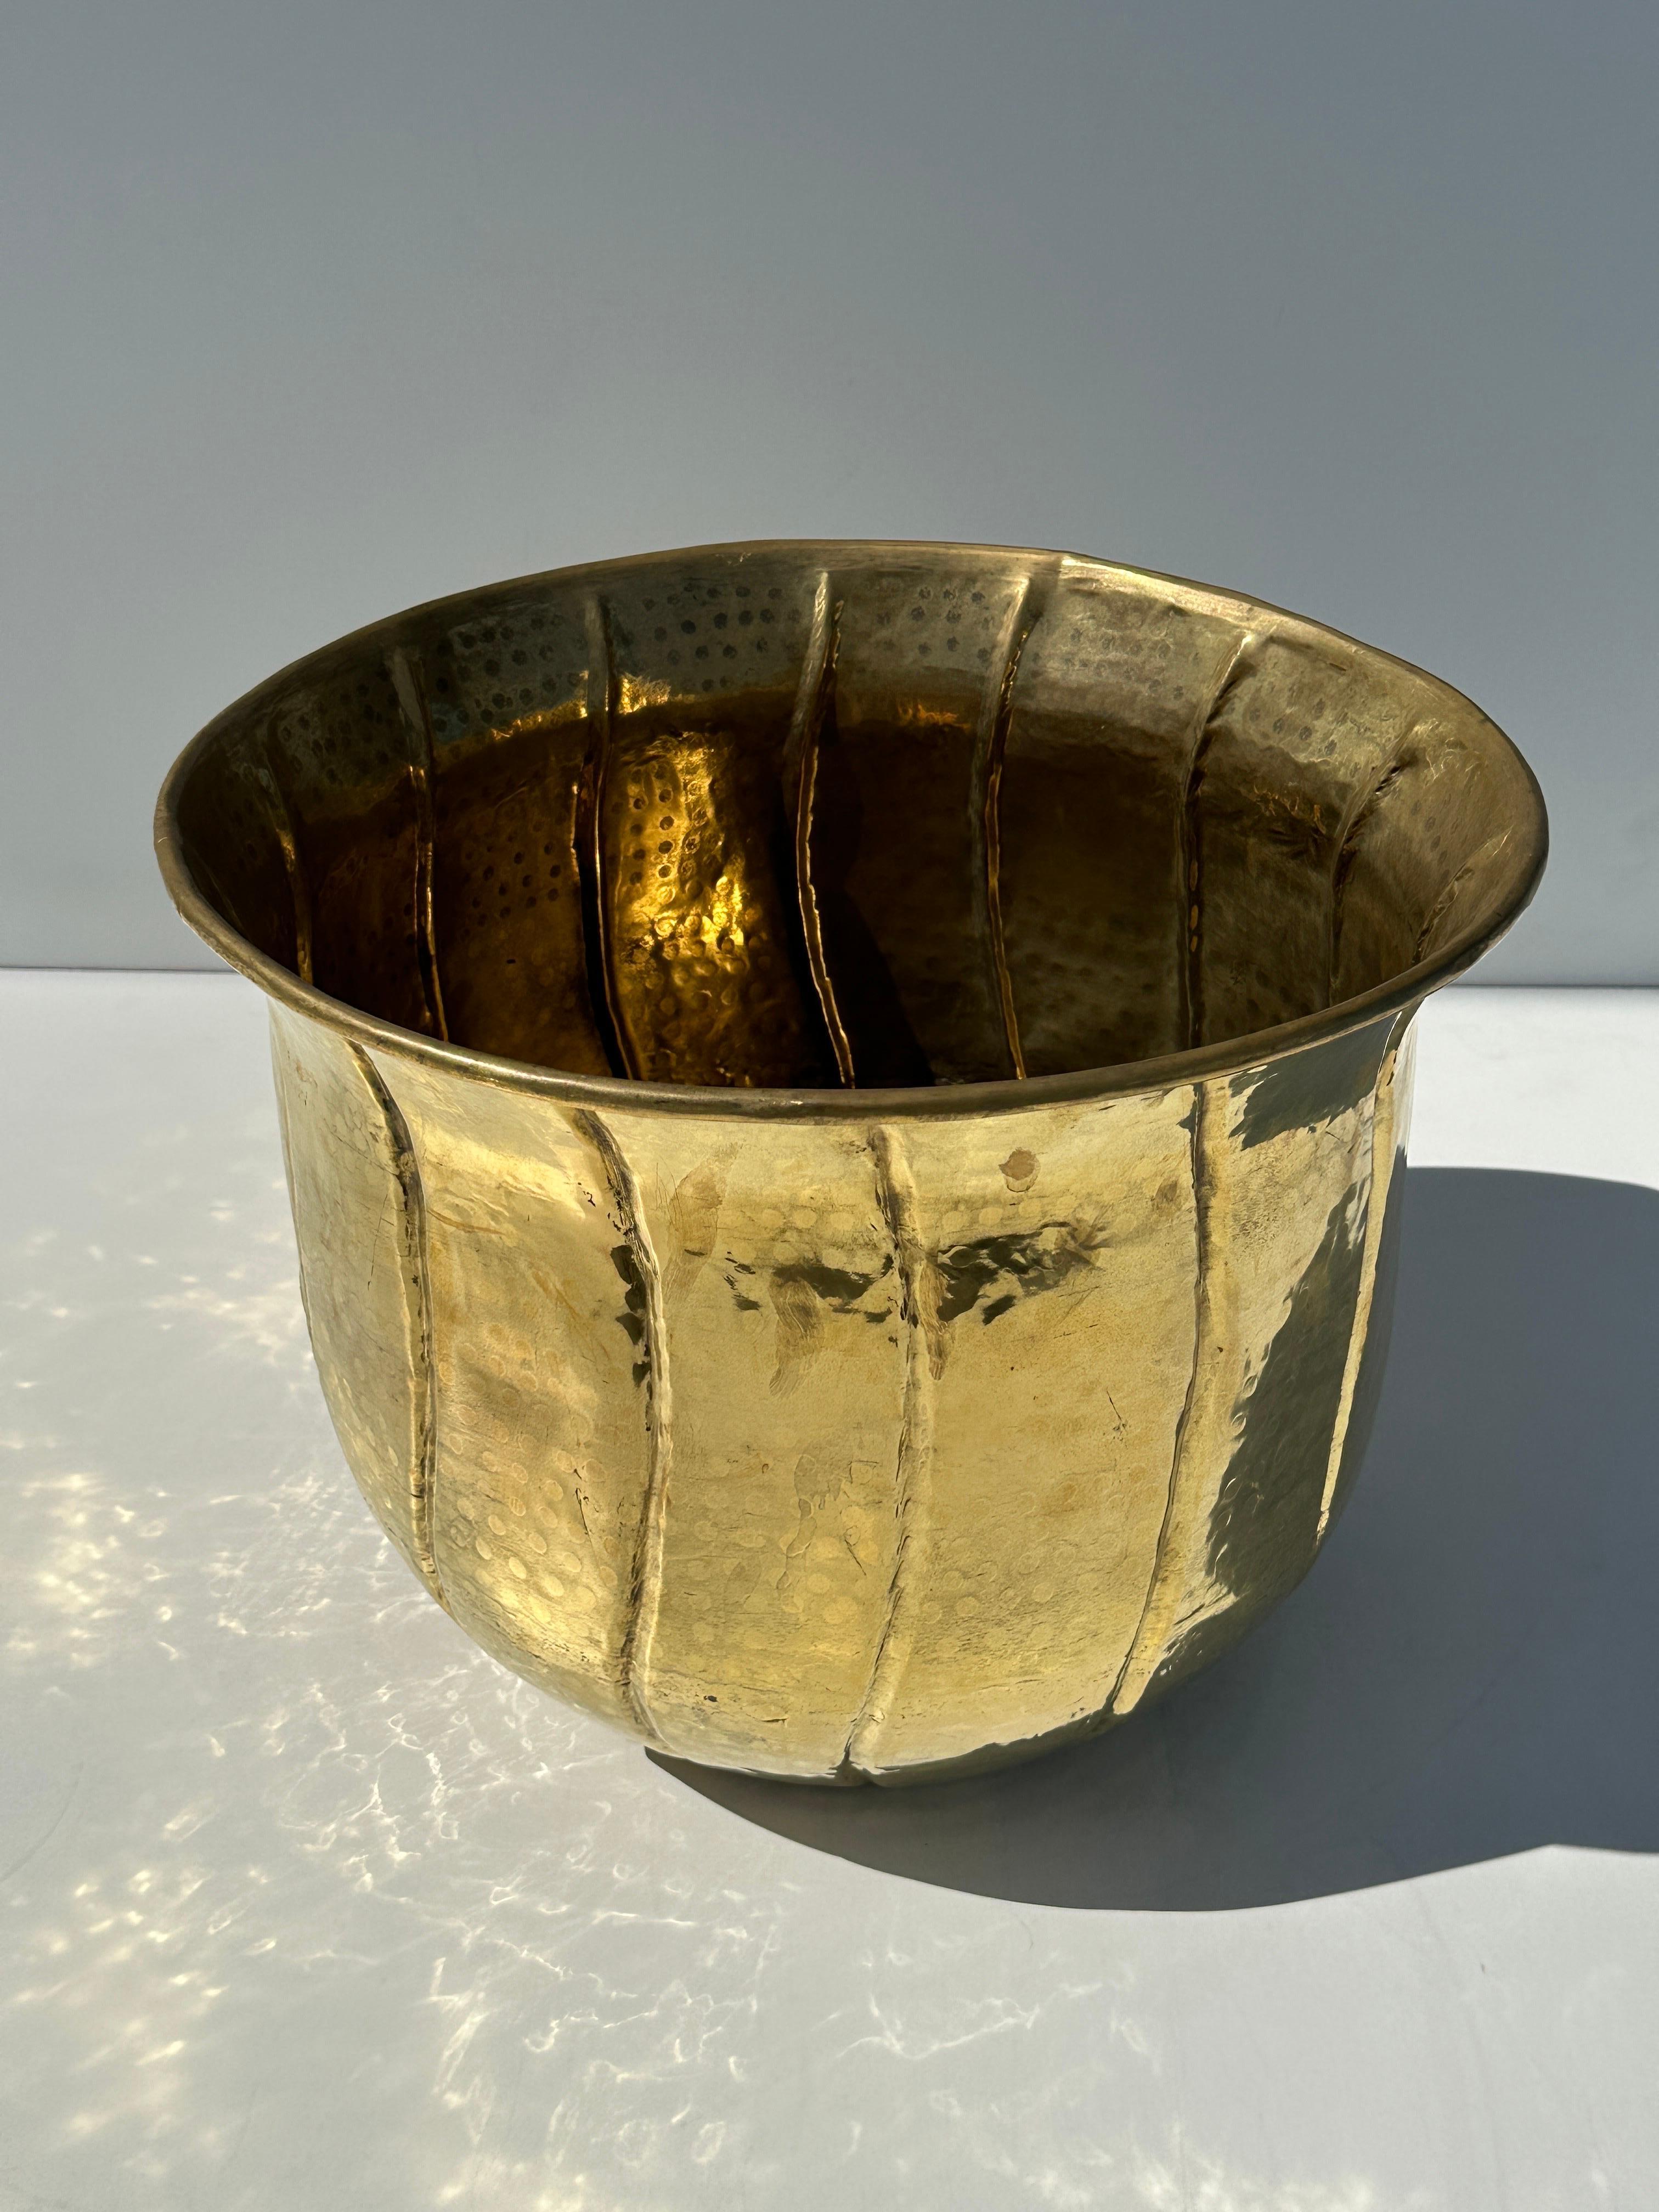 Large hand hammered brass planter. We also have matching extra large and medium planters available shown in last photo.